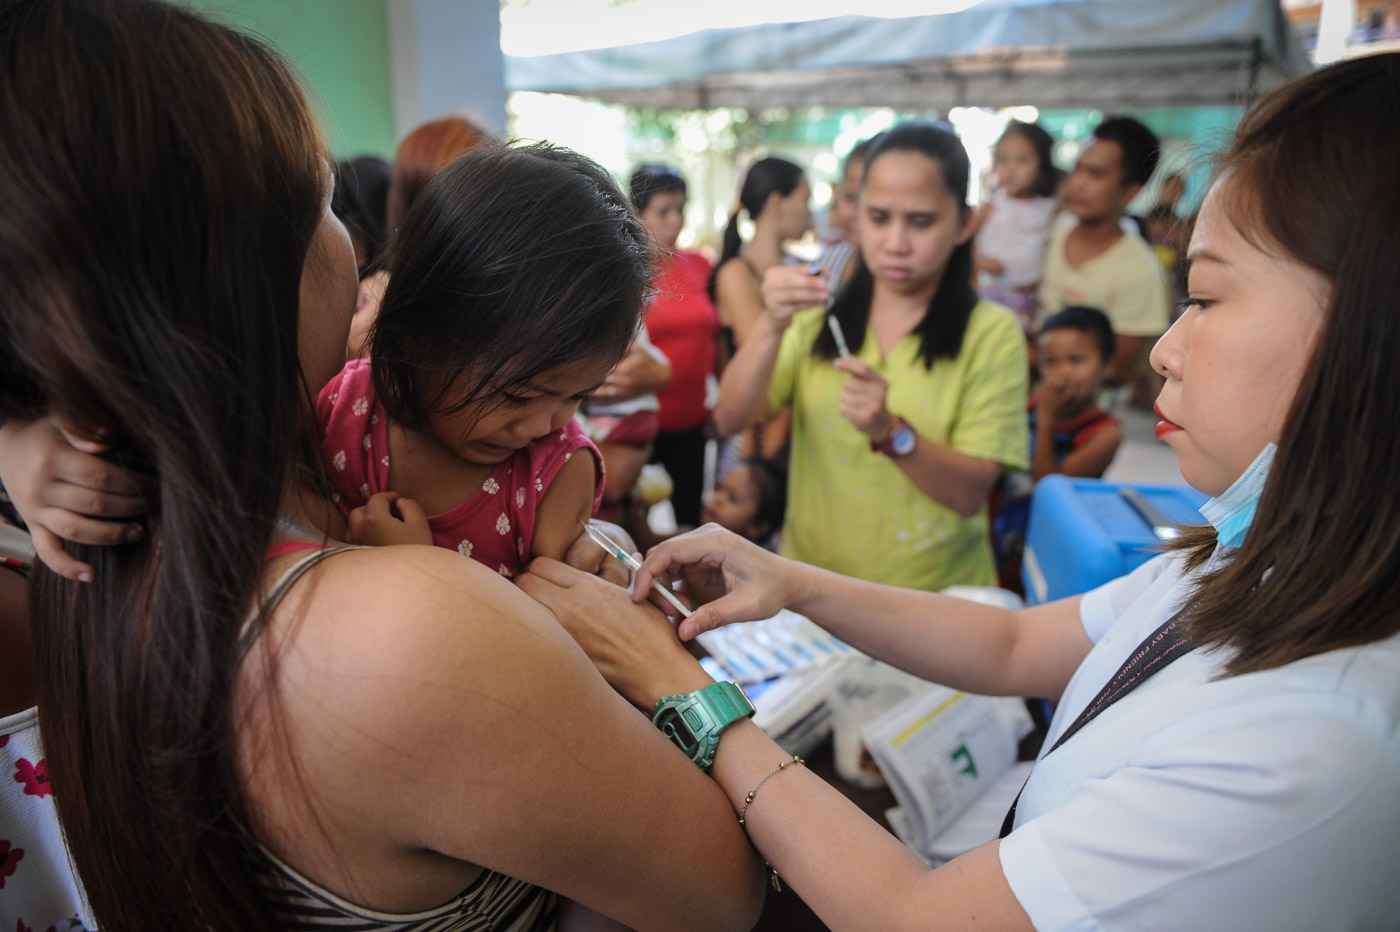 VACCINATE FIRST. Health workers vaccinate children in Baseco, Tondo on February 11, 2019 after the Department of Health declare a measles outbreak in Metro Manila. Photo by Ben Nabong/Rappler 